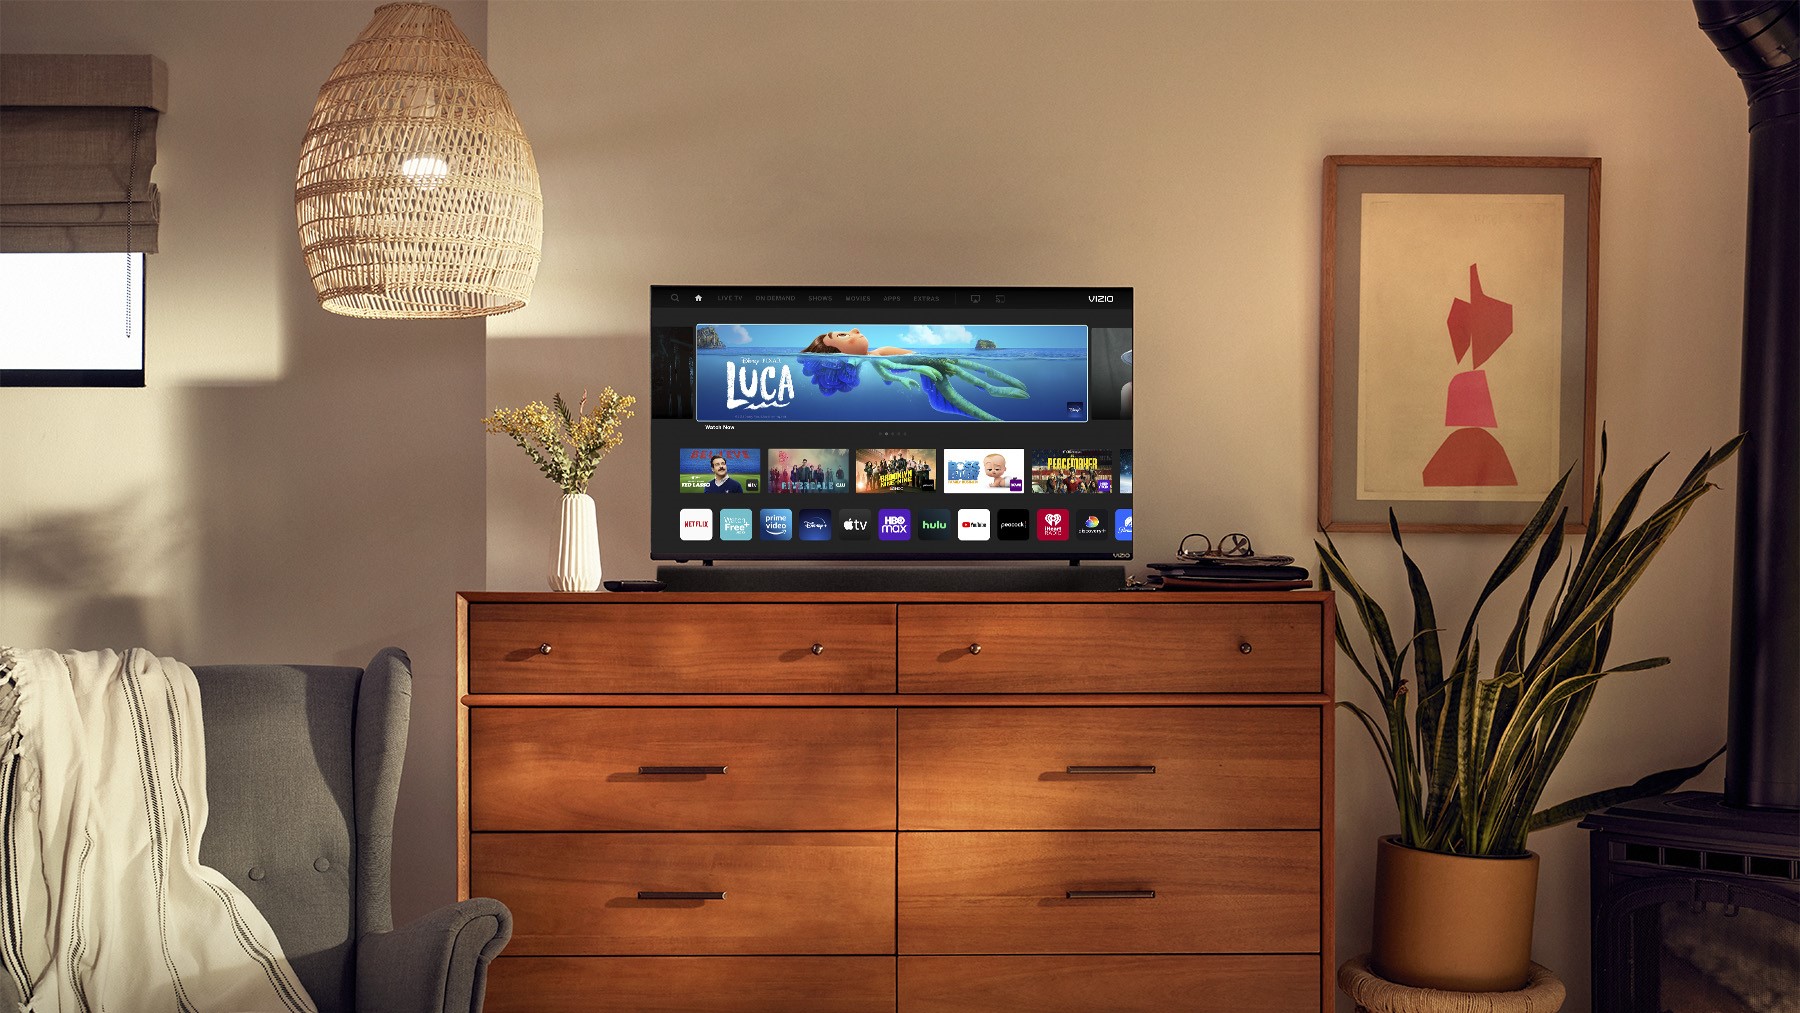 The Vizio D-Series on a set of drawers in a bedroom.